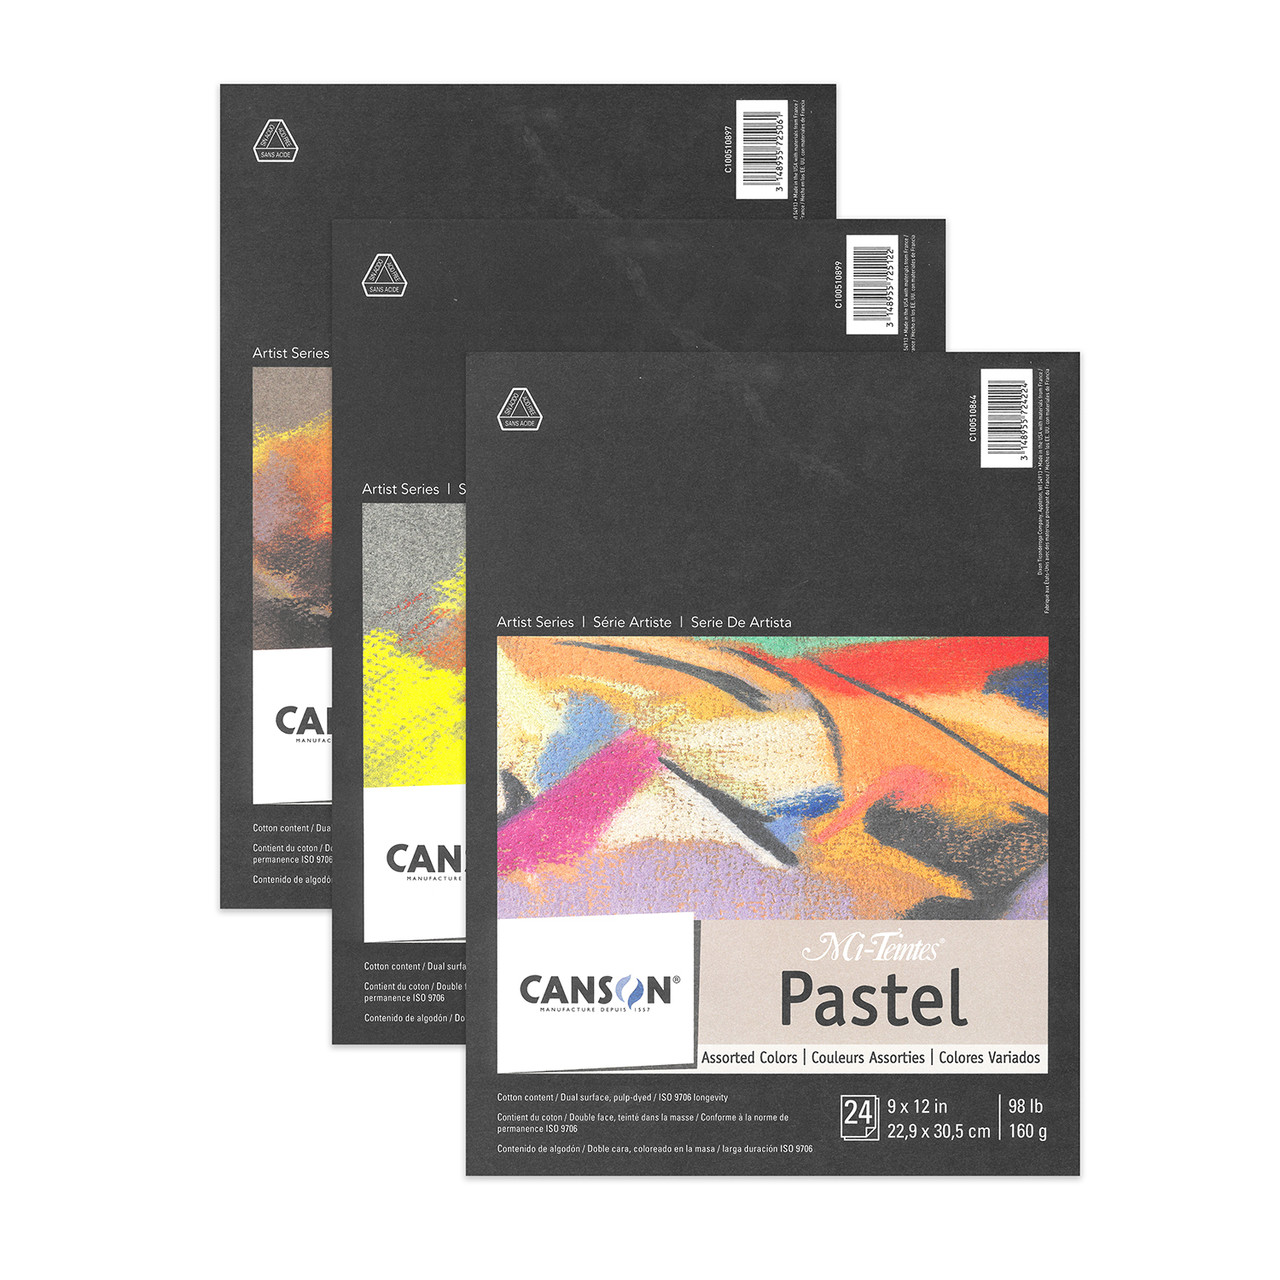 Canson Classic Cream Drawing Paper Sheets